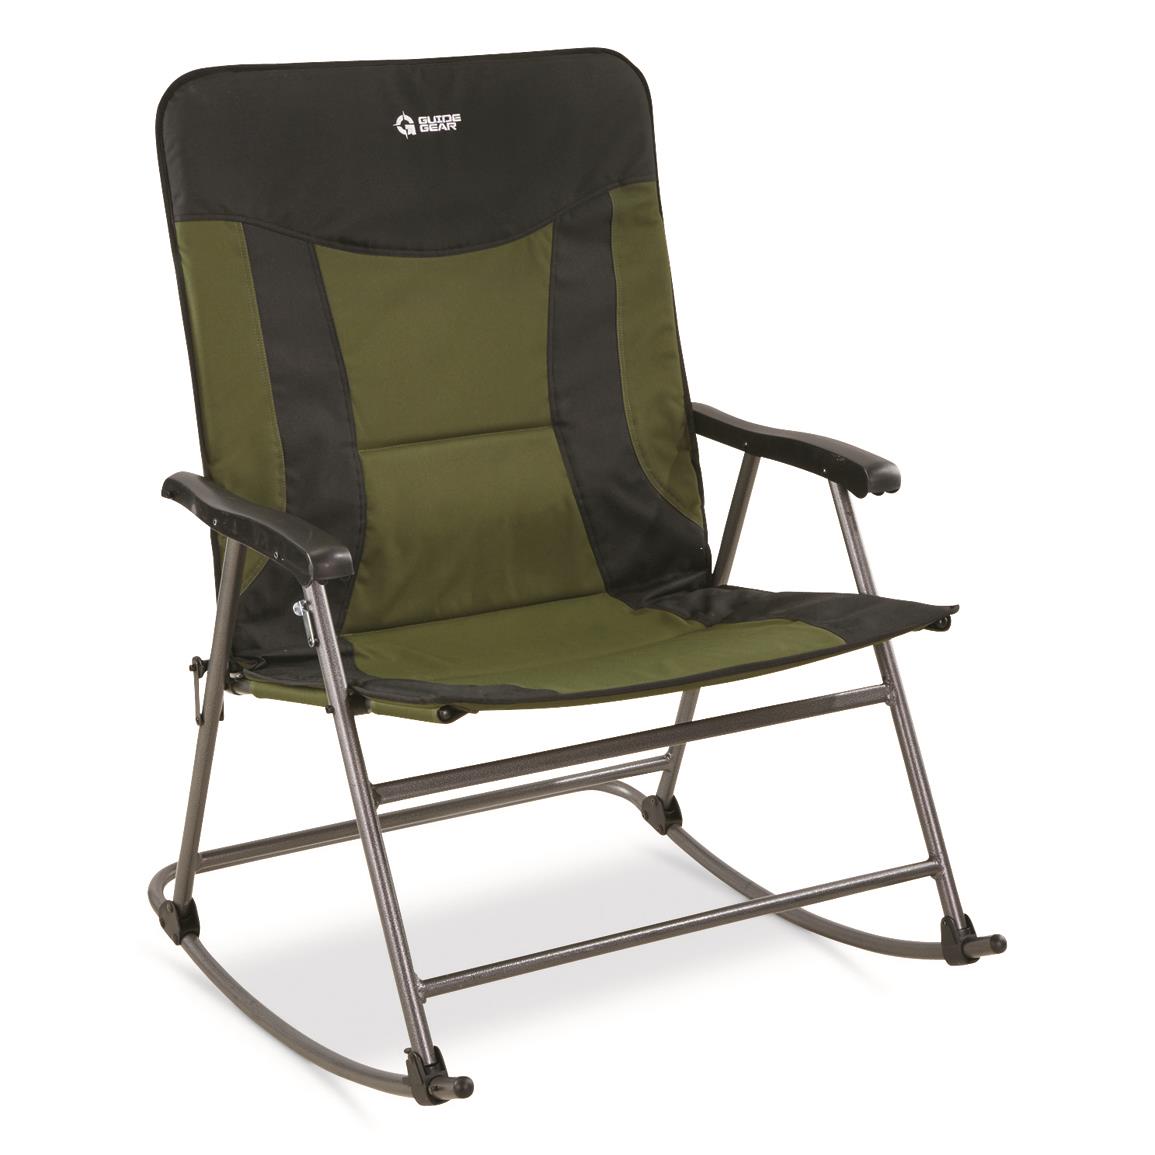 Guide Gear Oversized XXL Rocking Camp Chair, 600lb